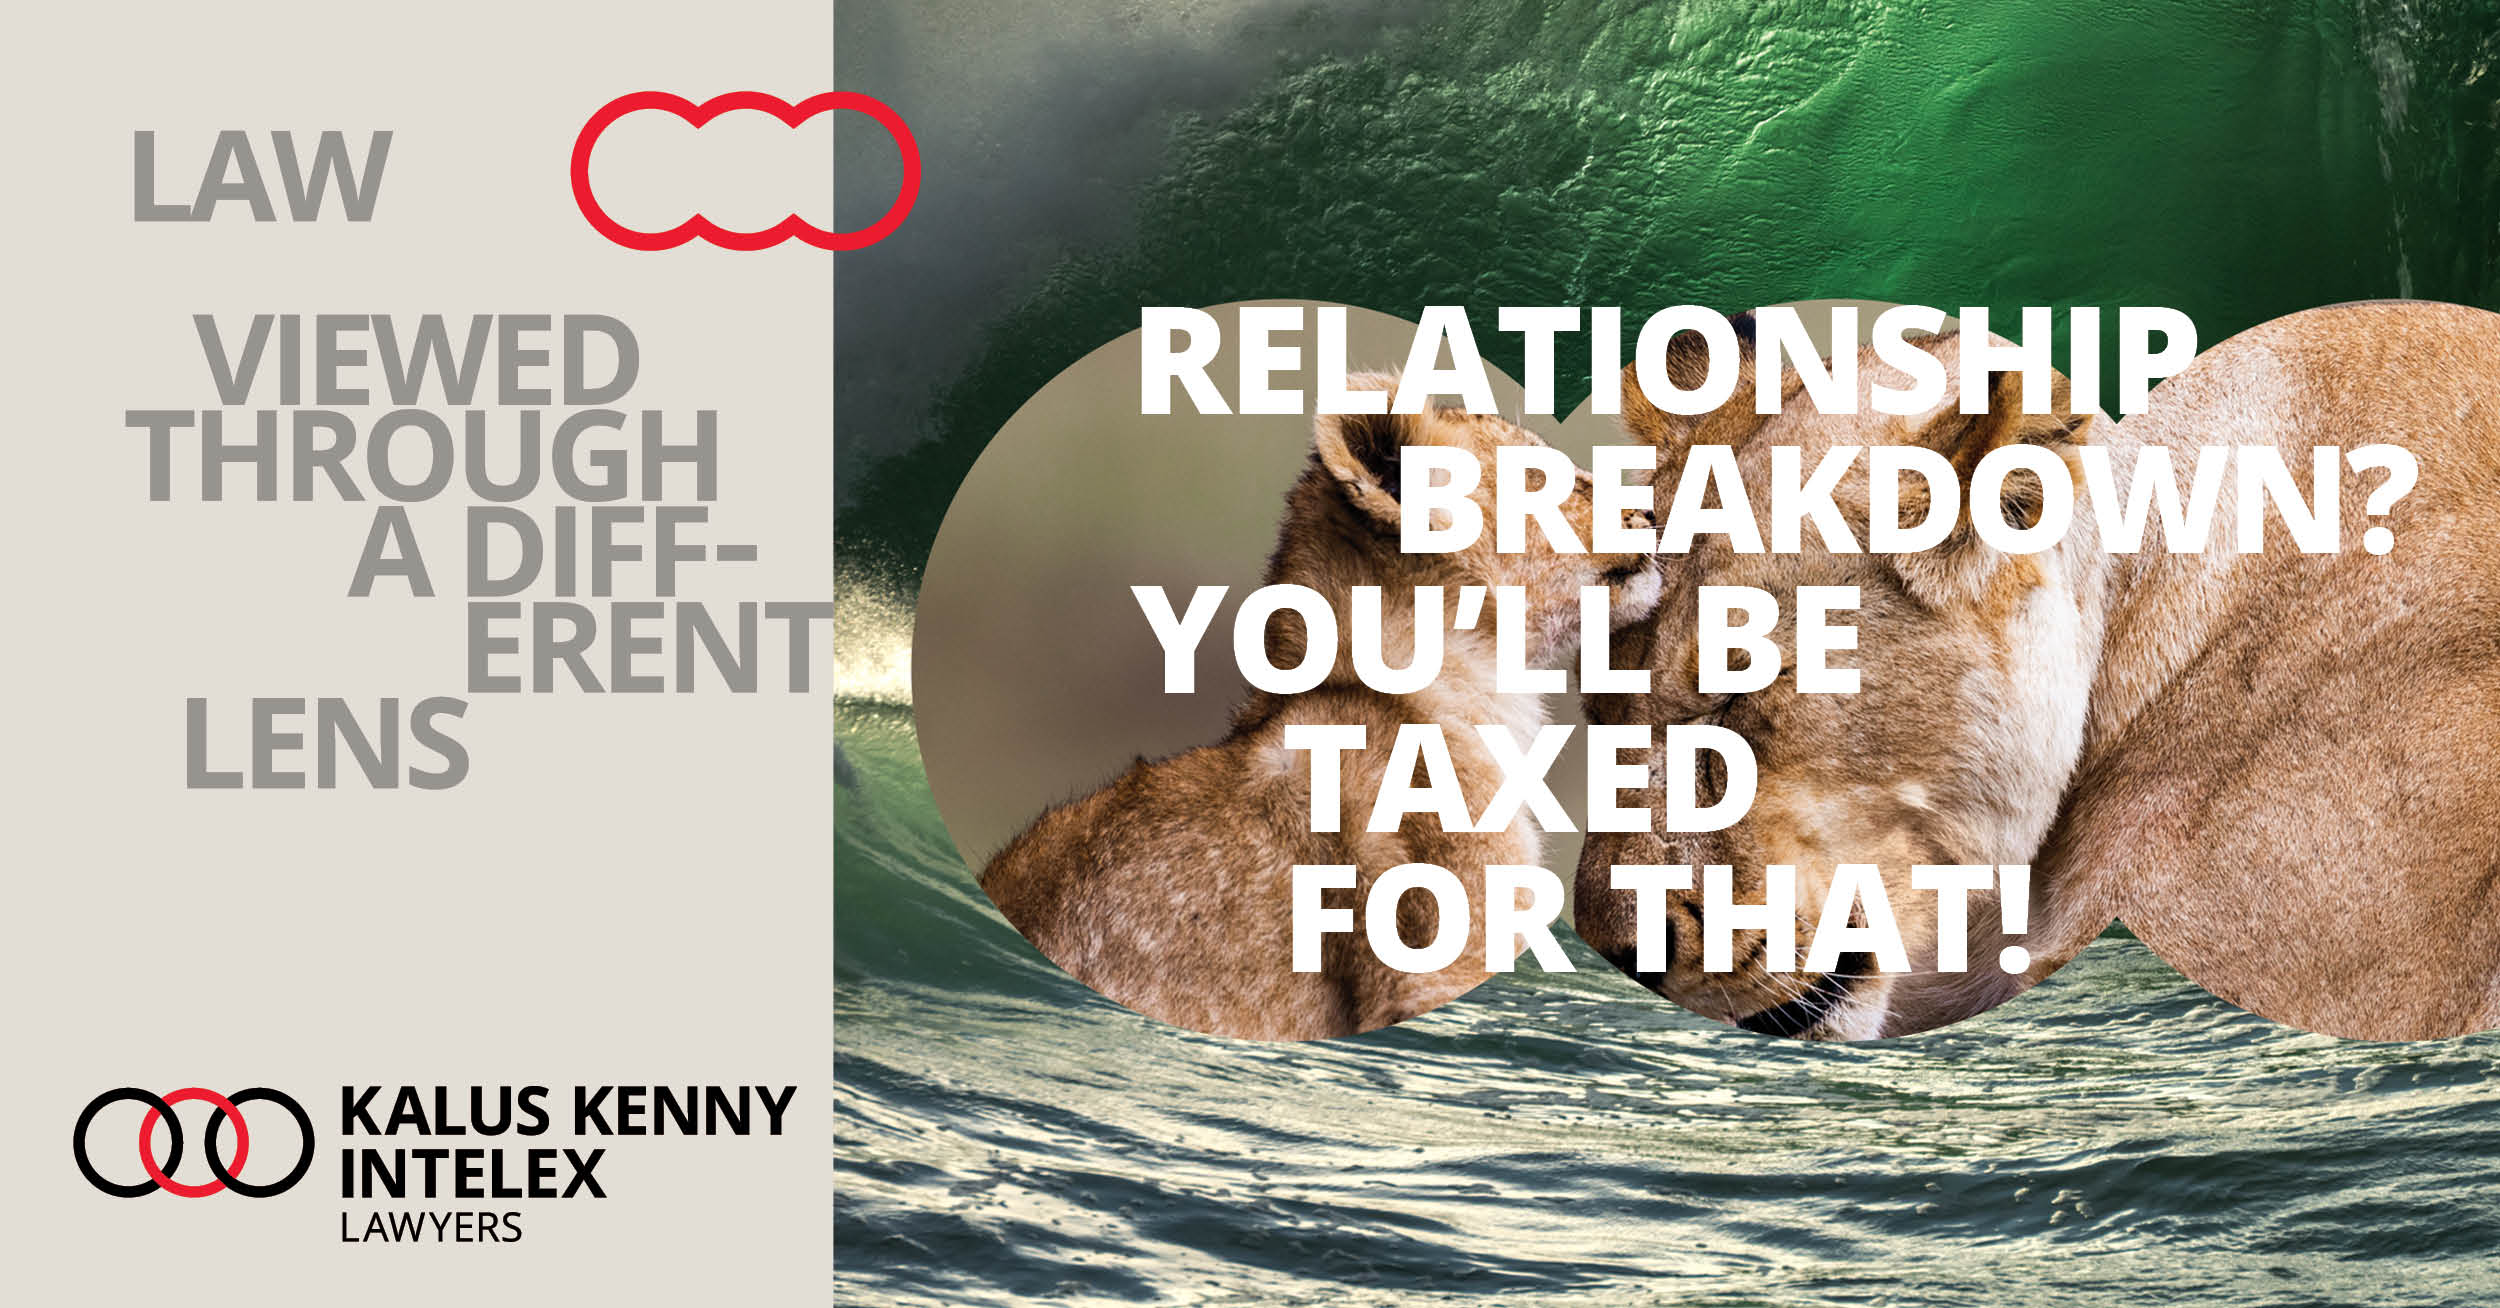 Relationship breakdown? You’ll be taxed for that!